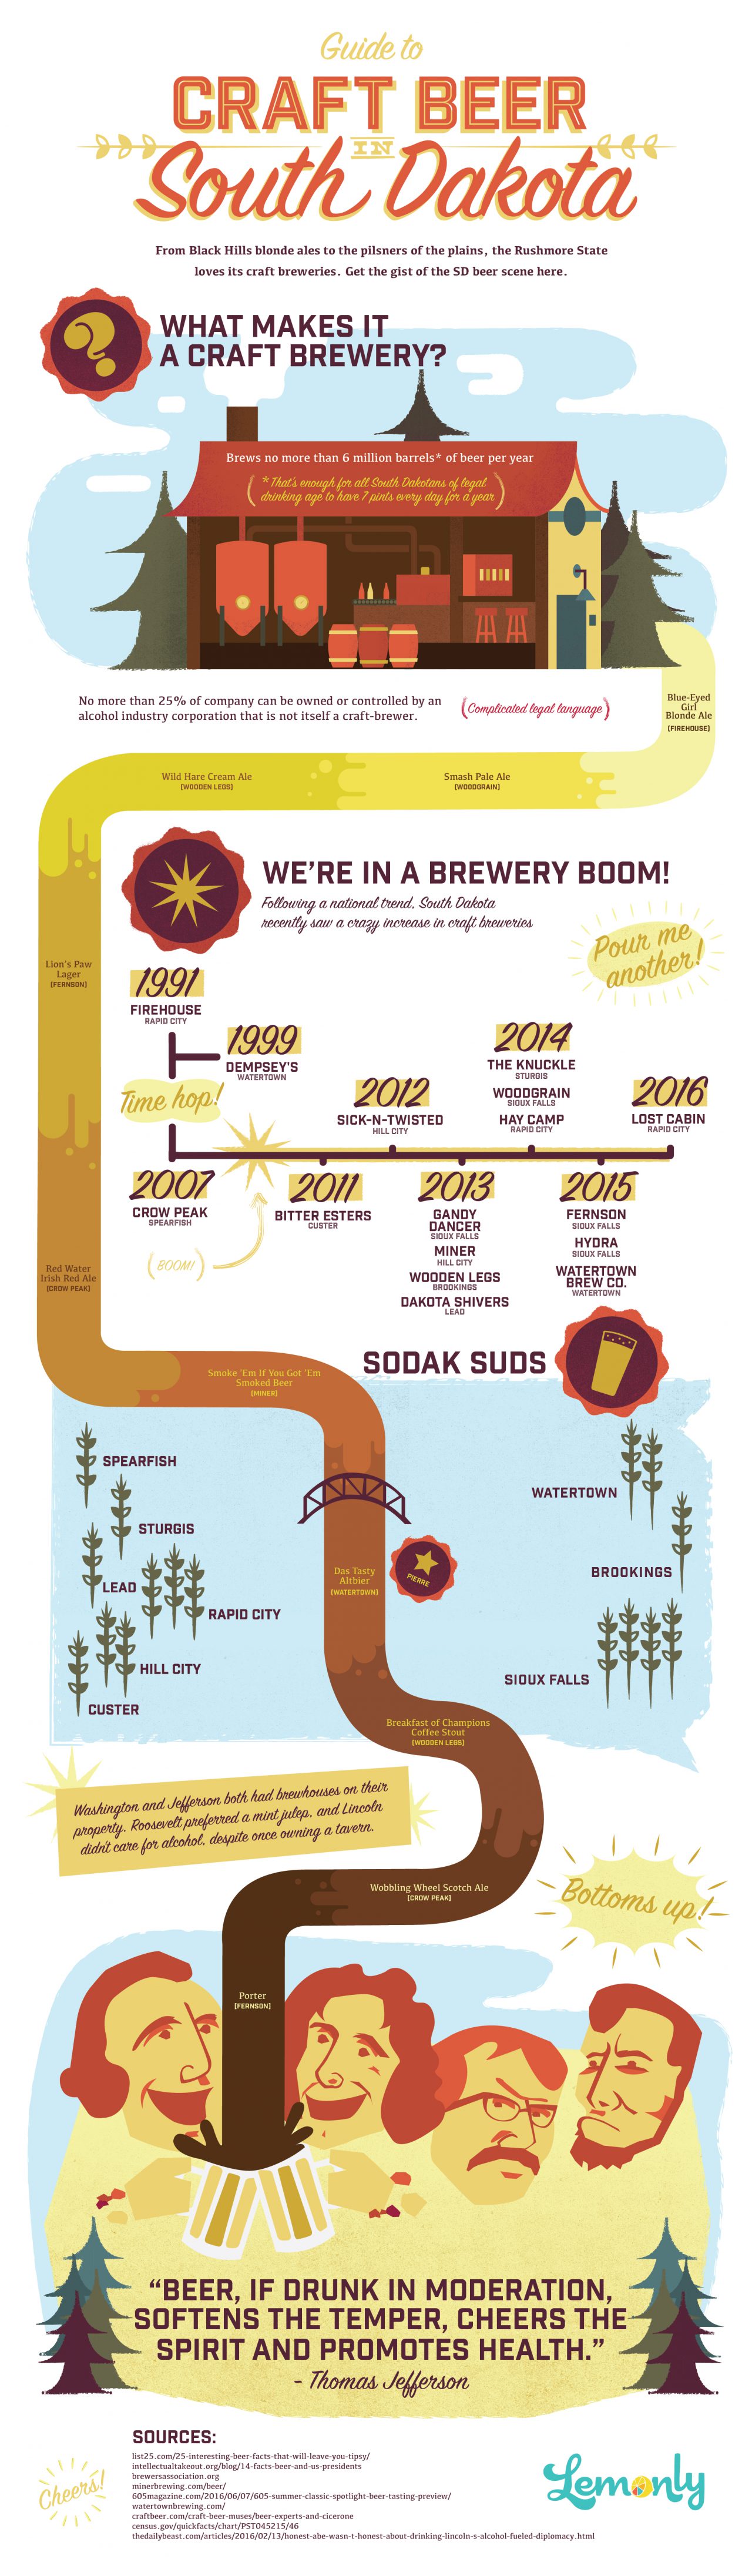 A Guide to Craft Beer in South Dakota Infographic